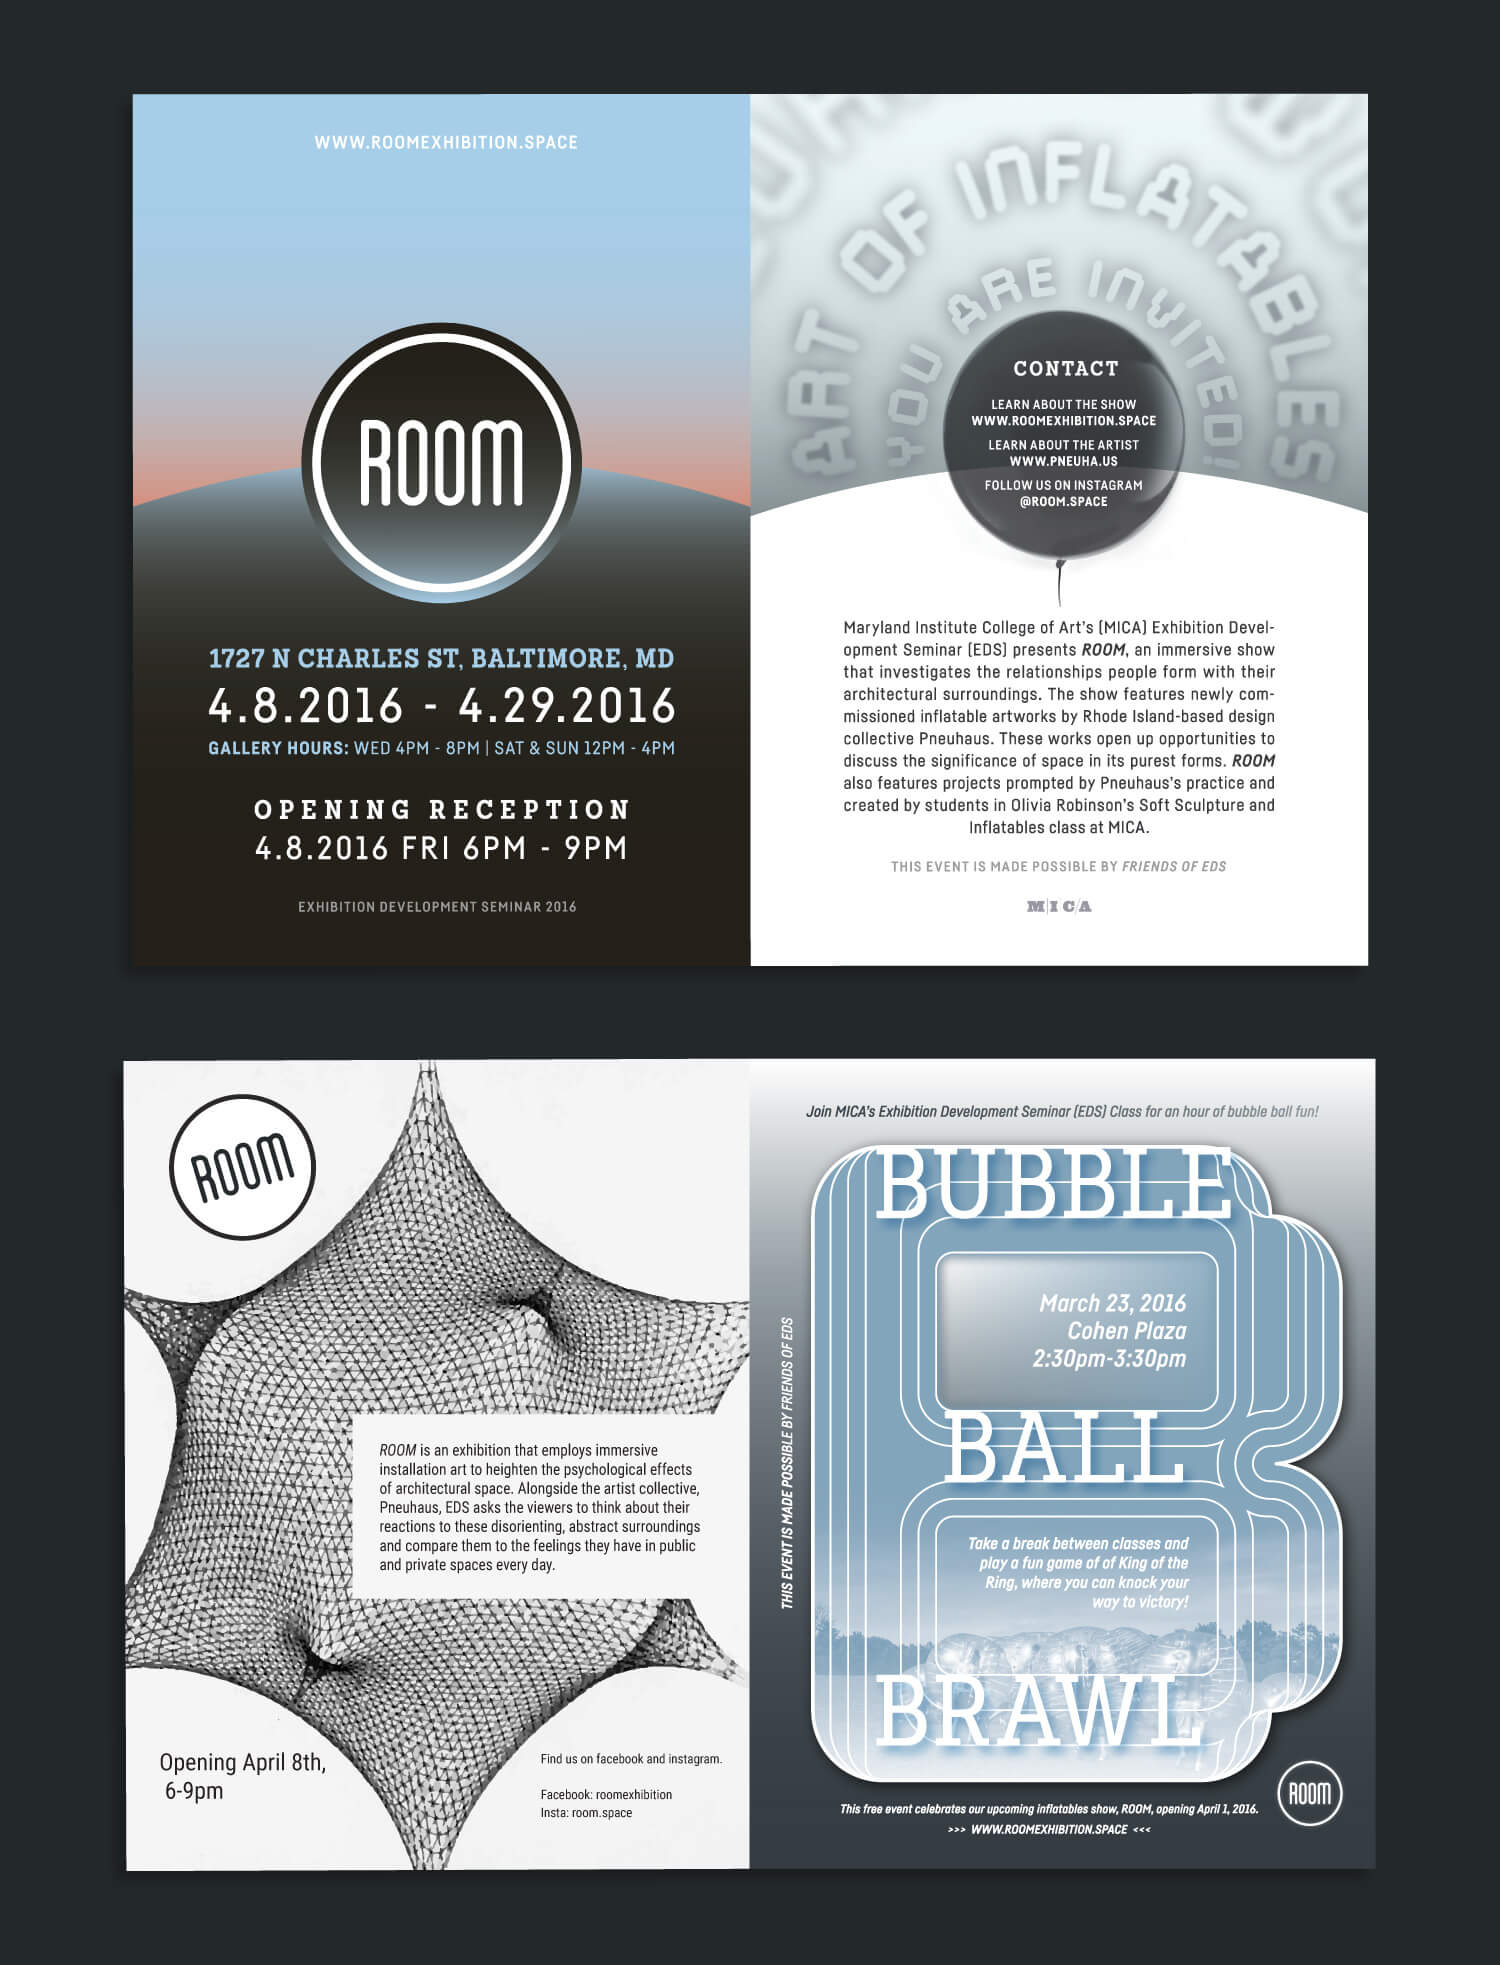 Flyers for the ROOM exhibition